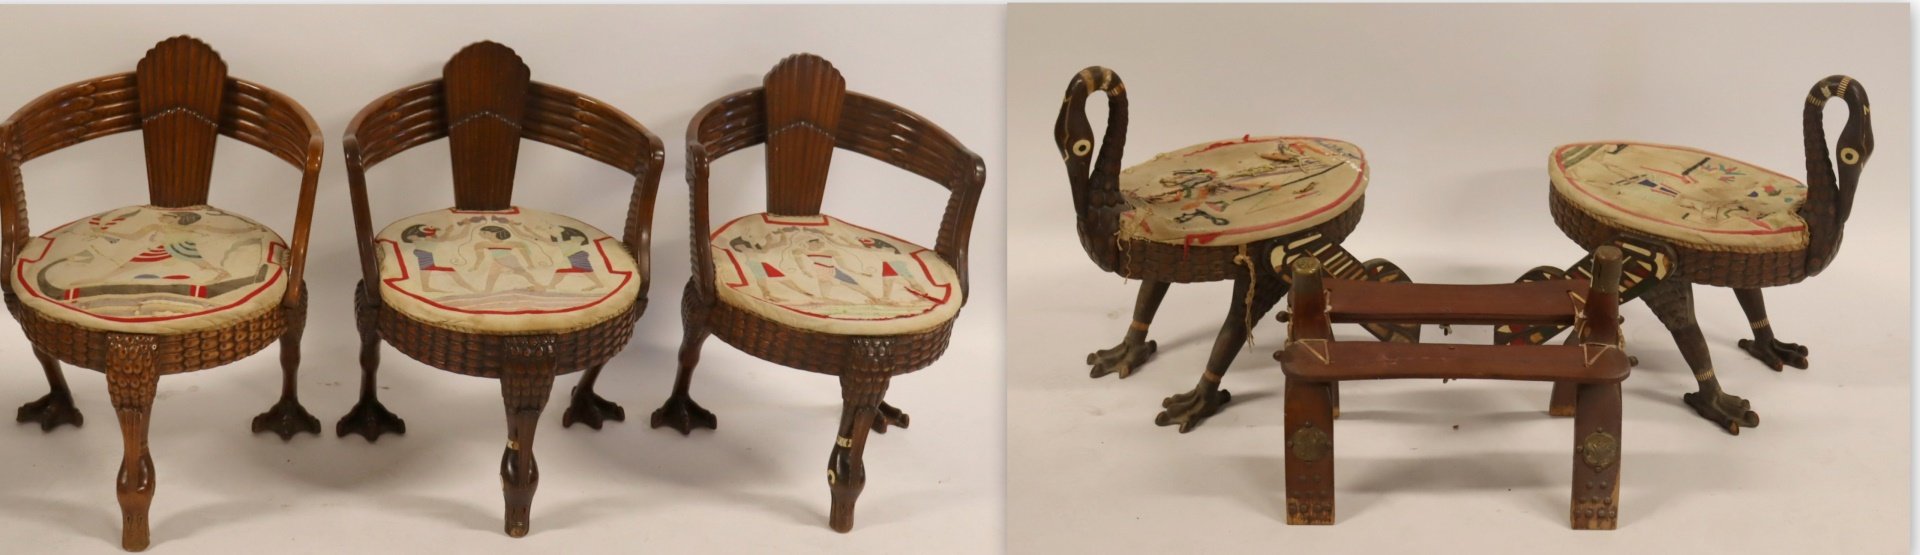 5 ANTIQUE GOOSE CHAIRS WITH EGYPTIAN 30b8f7